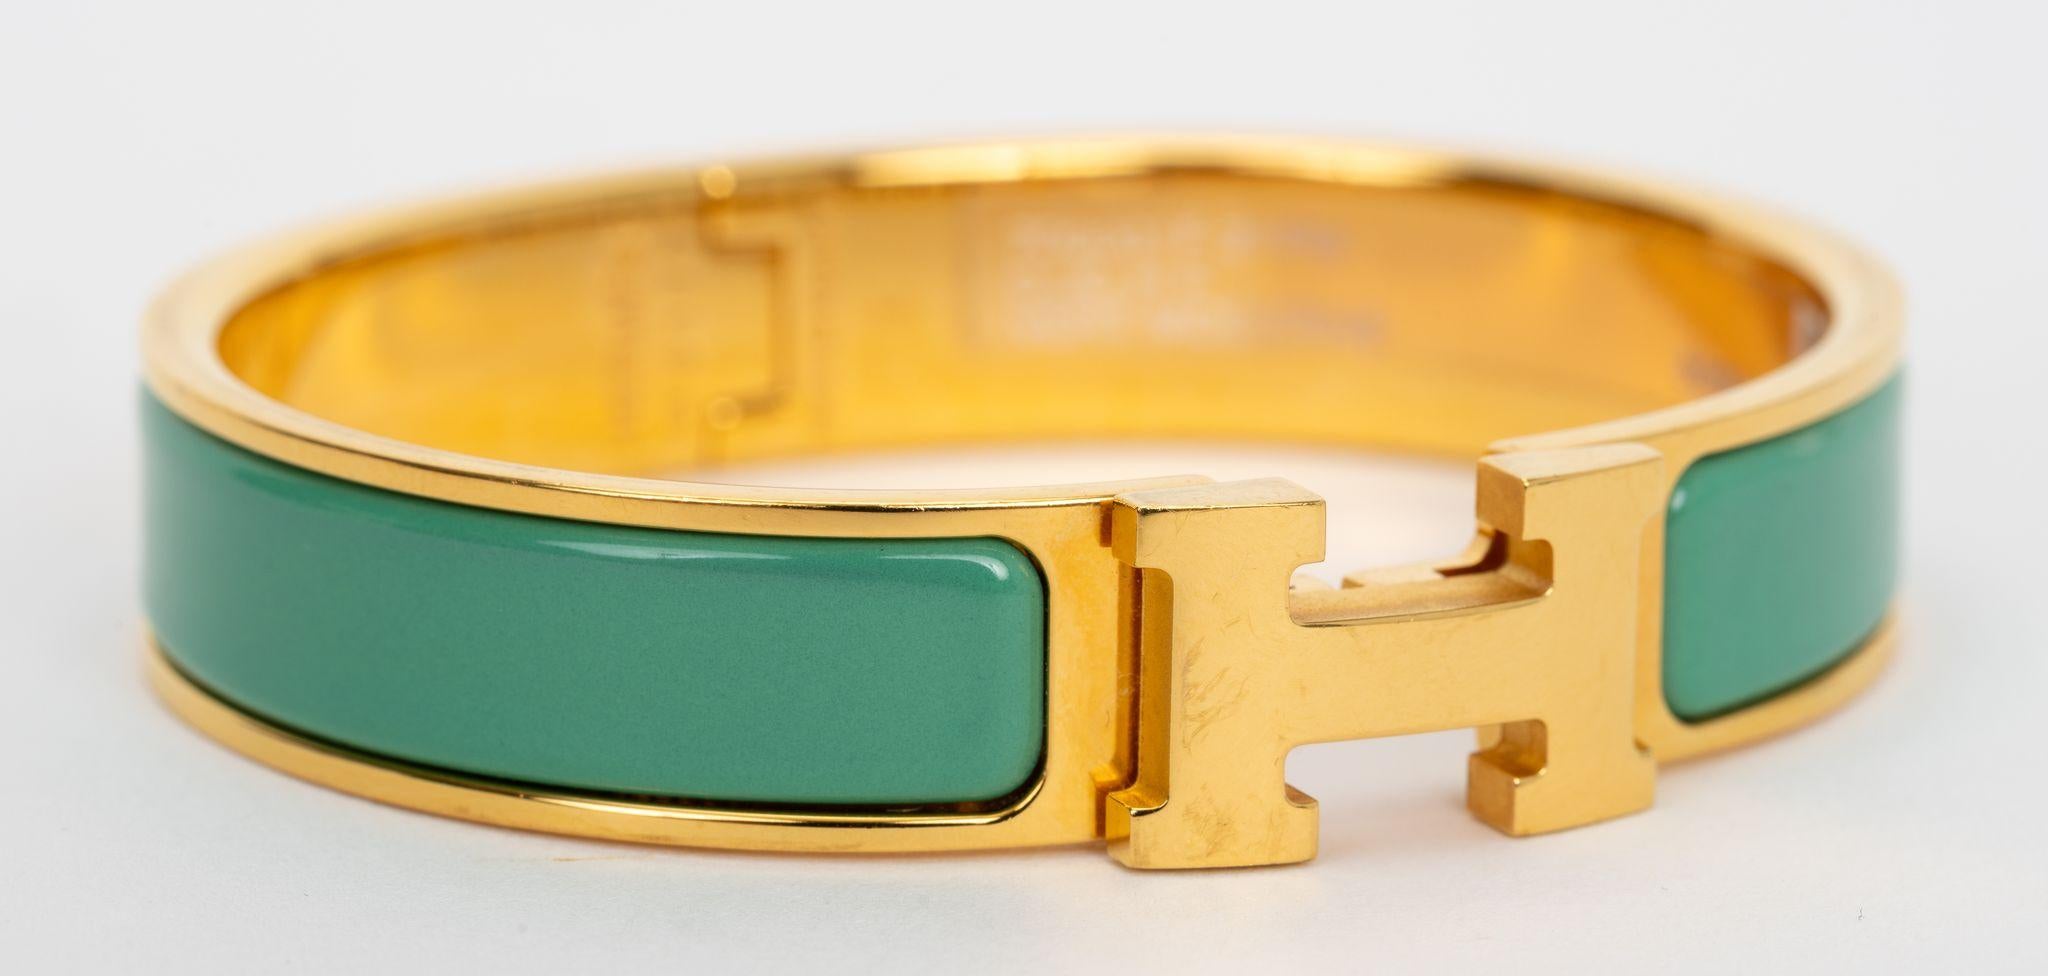 The Hermes new Clic clac H, narrow bracelet, in vert moderne enamel with gold-plated hardware.
Size PM, new in unworn condition, comes with velvet pouch.